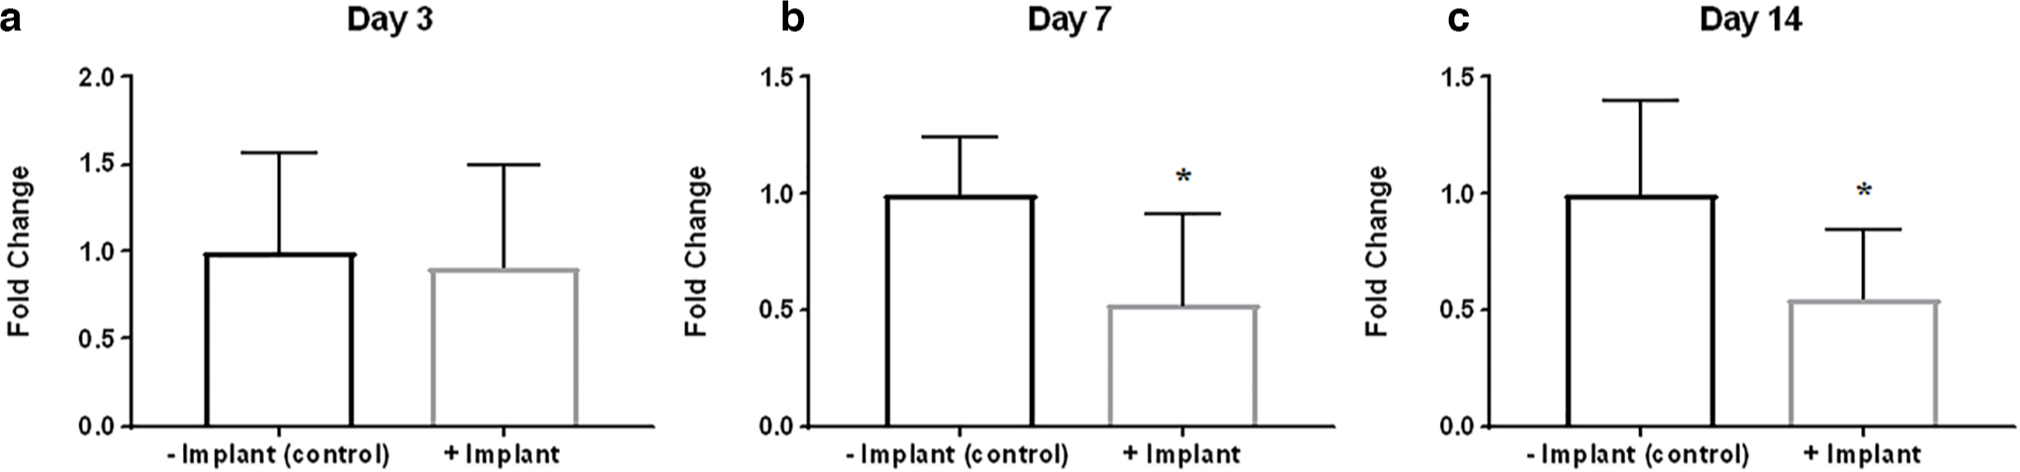 Fig. 2 
            Implantation of dead muscle tissue caused a decrease in circulating level of transforming growth factor-beta 1 (TGF-β1) at later timepoints. Blood sample analysis of plasma TGF-β1 level in animals with or without dead muscle tissue implantation at: a) Day 3; b) Day 7; and c) Day 14 timepoints. *p < 0.05; n = 6 to 8.
          